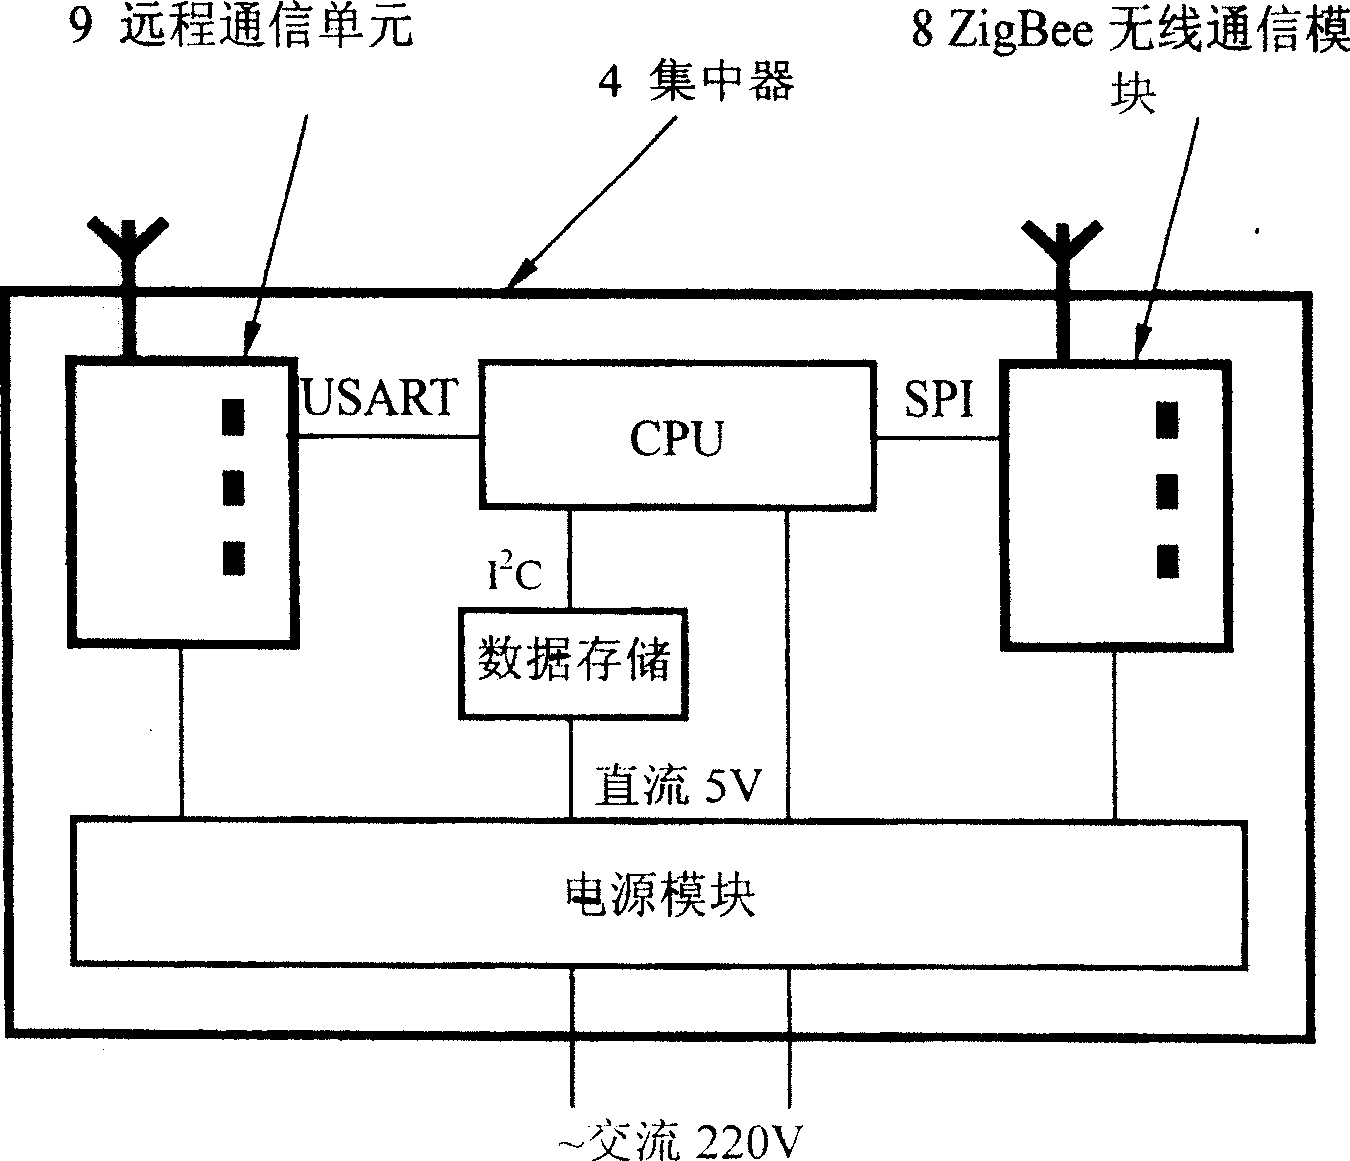 Automatic meter reading system based on ZigBee technology